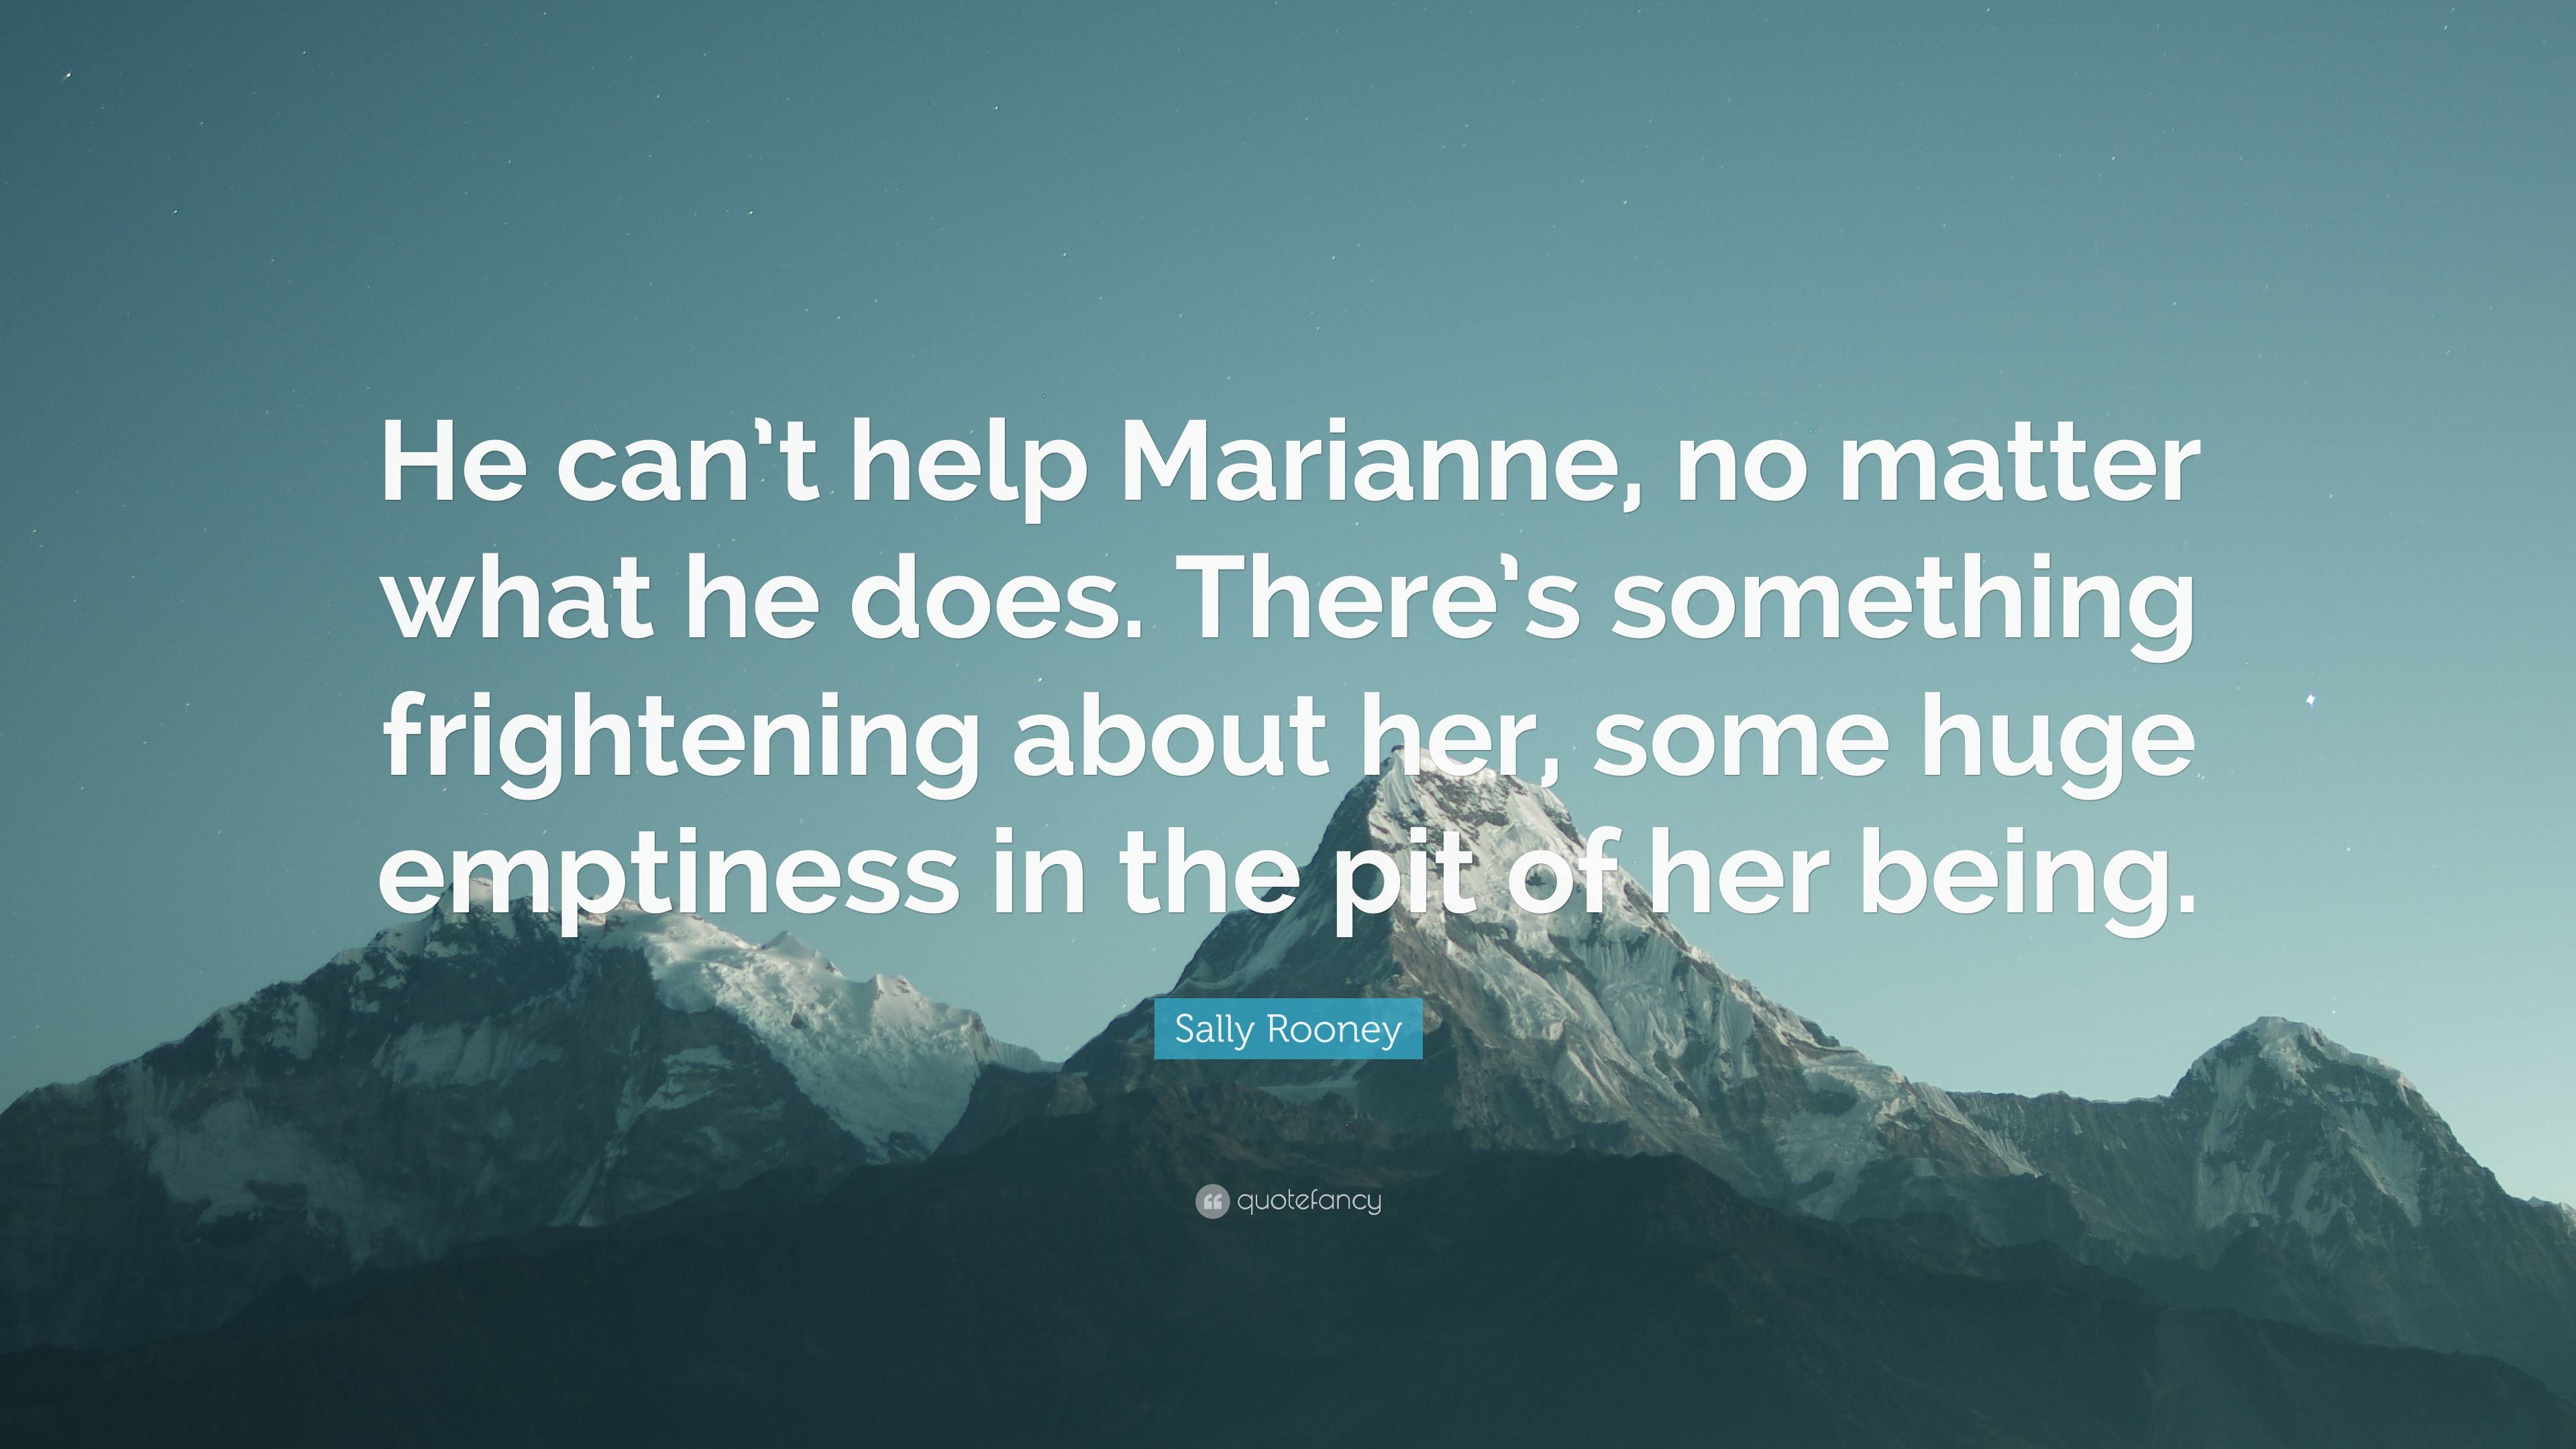 Sally Rooney Quote “He can’t help Marianne, no matter what he does